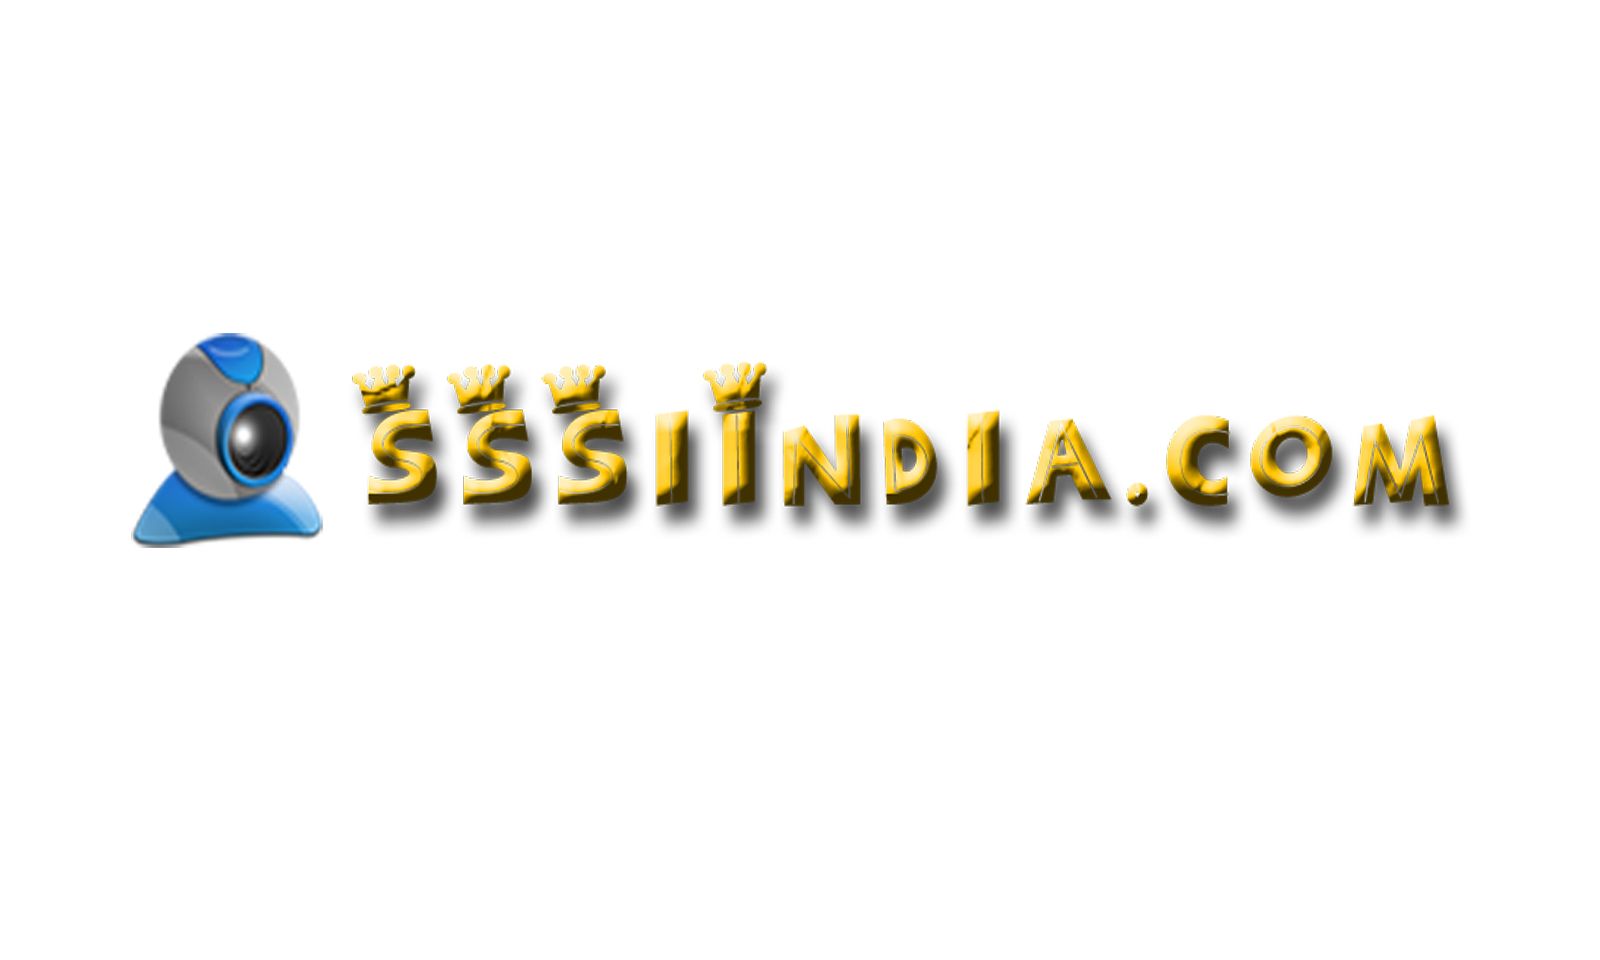 sssiindia.com Introduces Women of India to World of Webcam